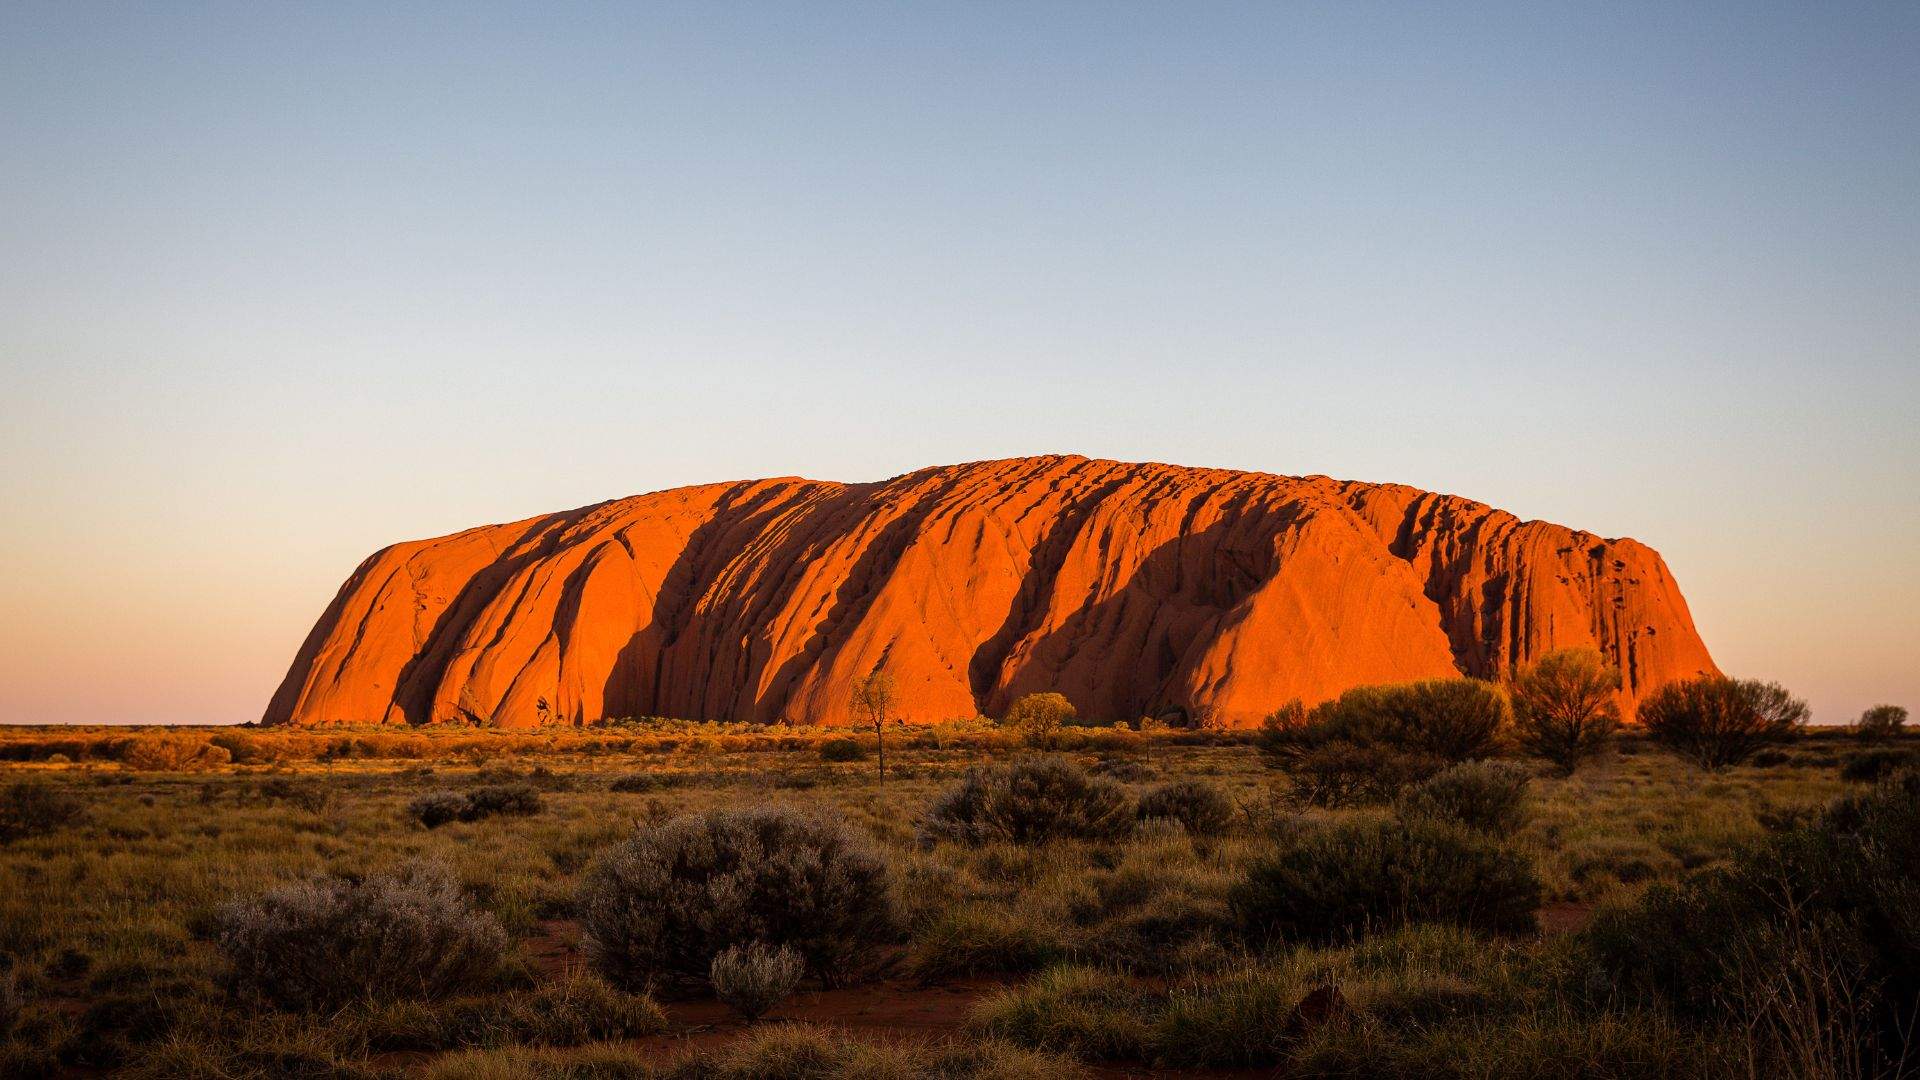 Desert Beauty: Exploring the Rich Culture and Stunning Vistas of the Red Centre